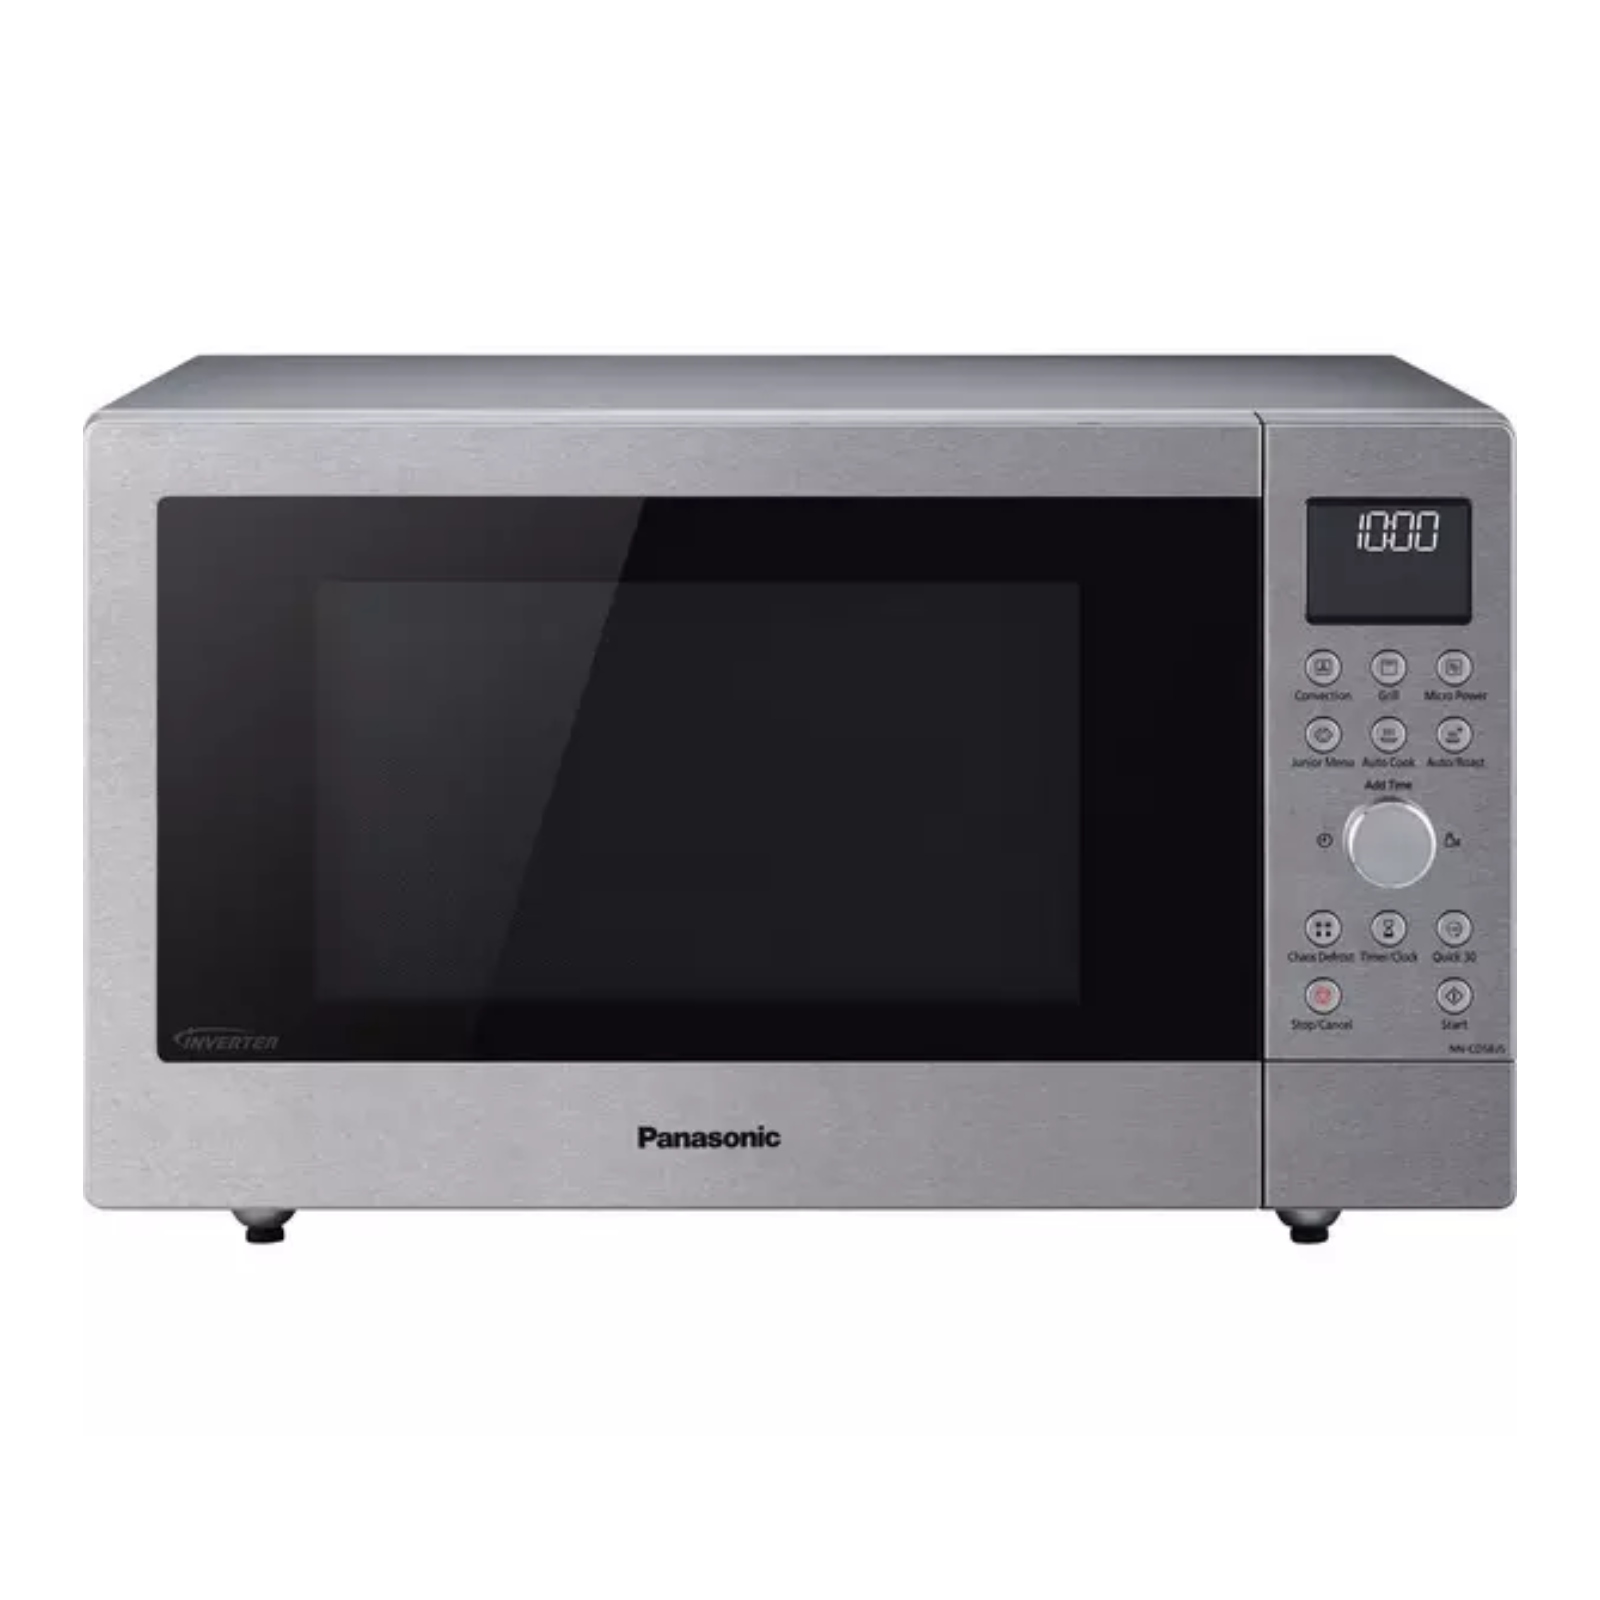 Panasonic Convection Grill And Microwave Oven Stainless